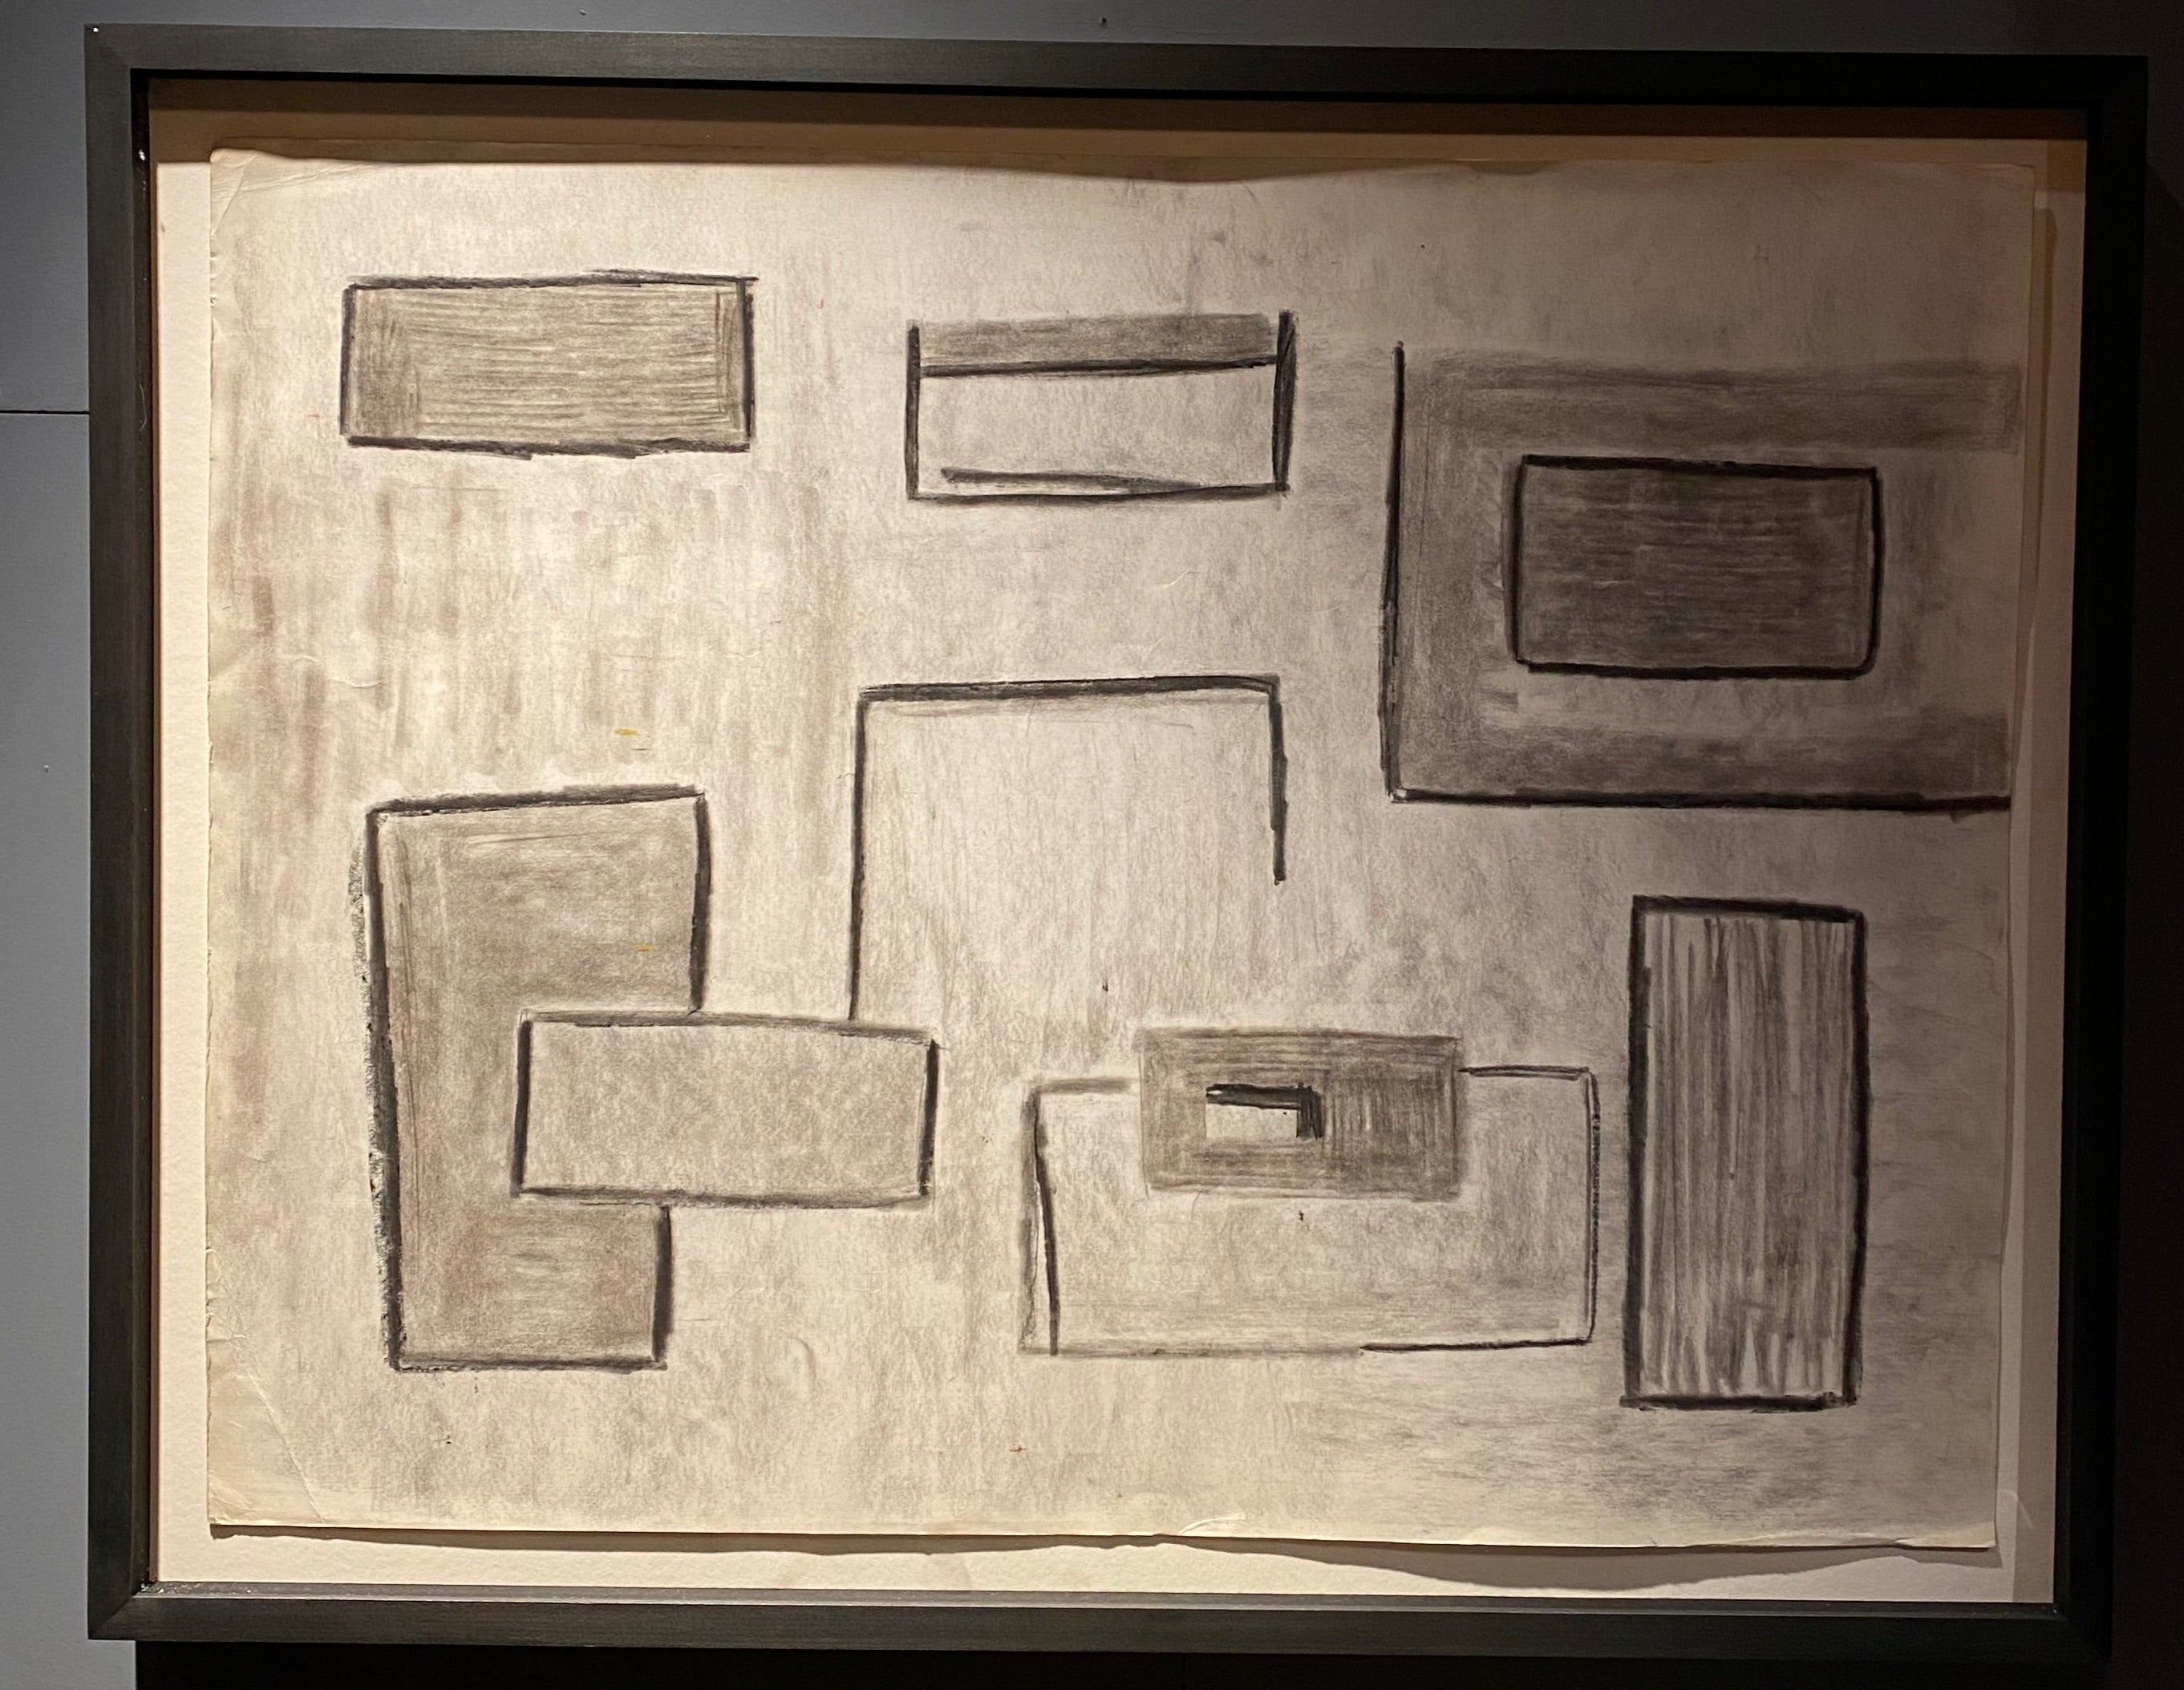 Black Framed Gray Squares, Cubist Abstract Drawing